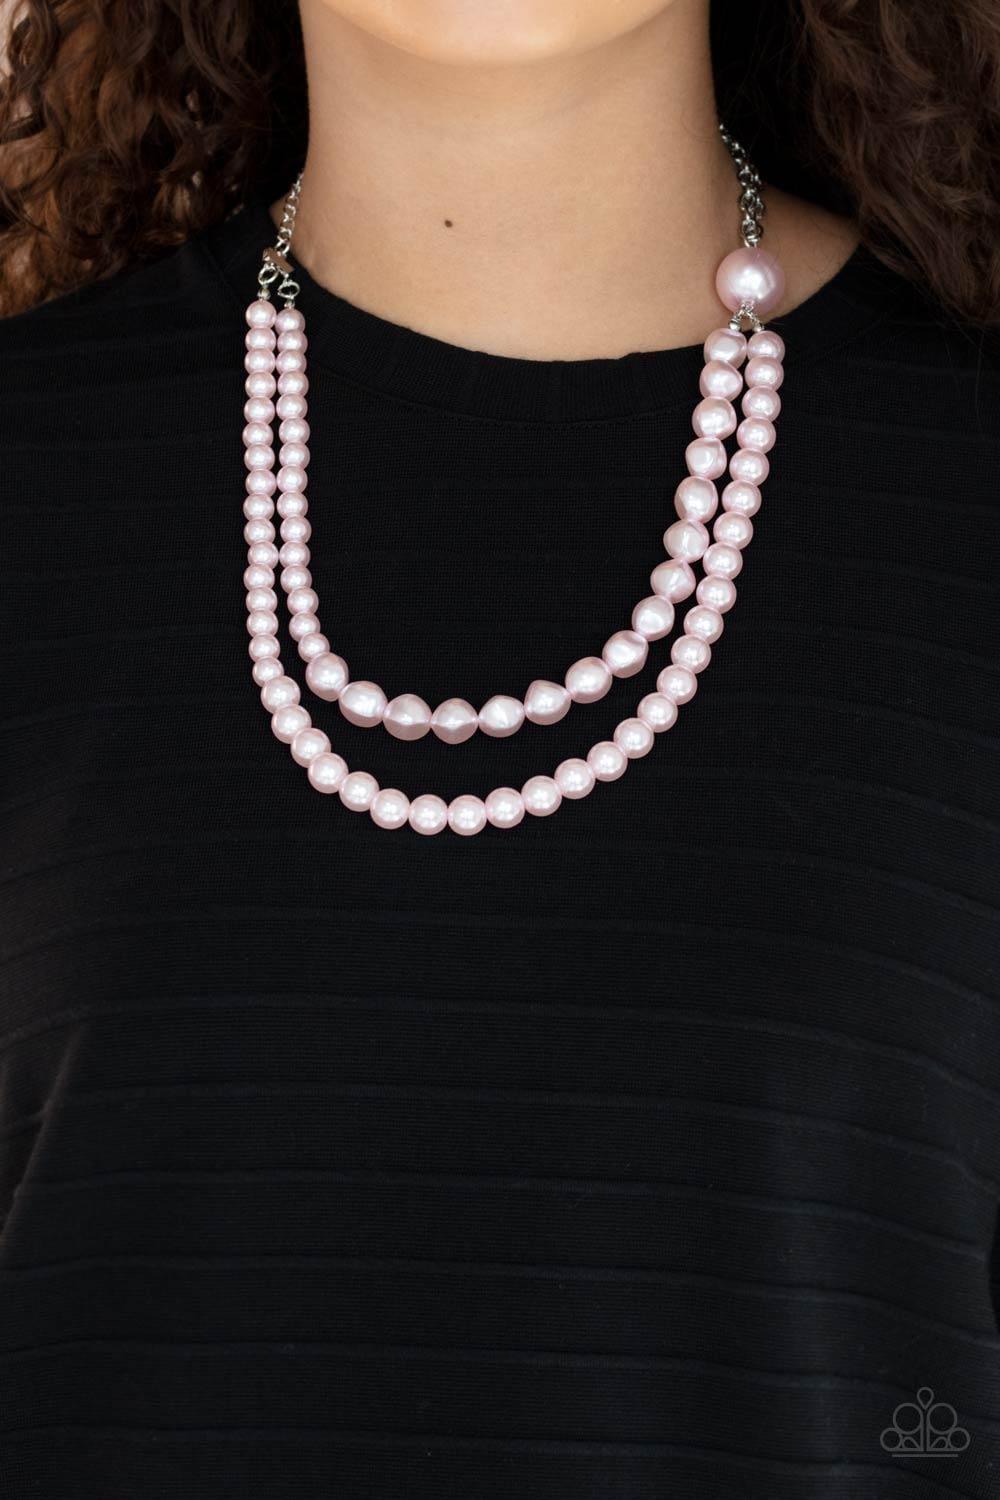 Paparazzi Accessories - Remarkable Radiance - Pink Pearl Necklace - Bling by JessieK